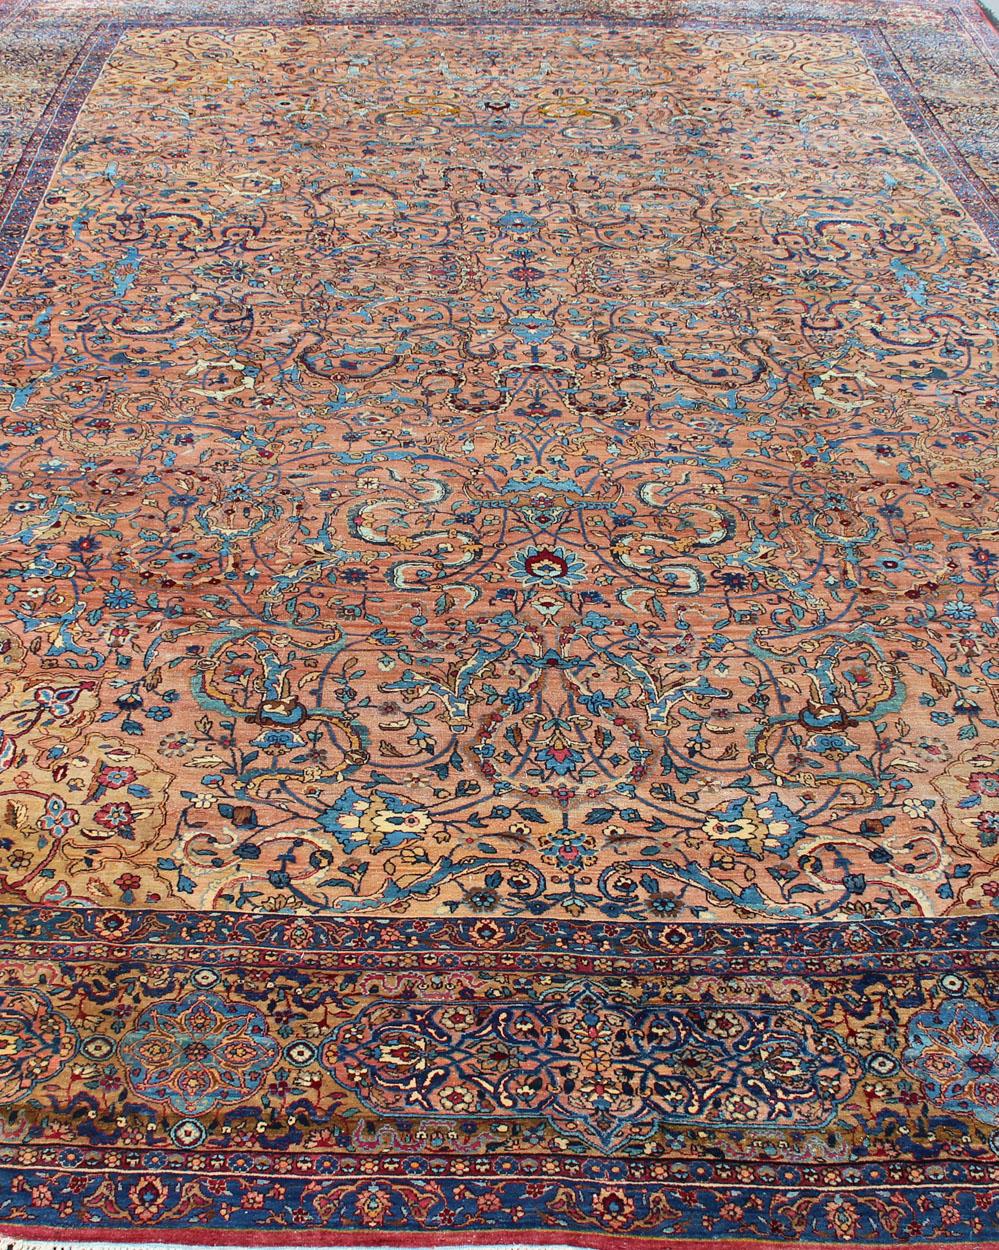 Classic Colorful Antique Large Lavar Kerman Persian Rug in Salmon Background In Good Condition For Sale In Atlanta, GA